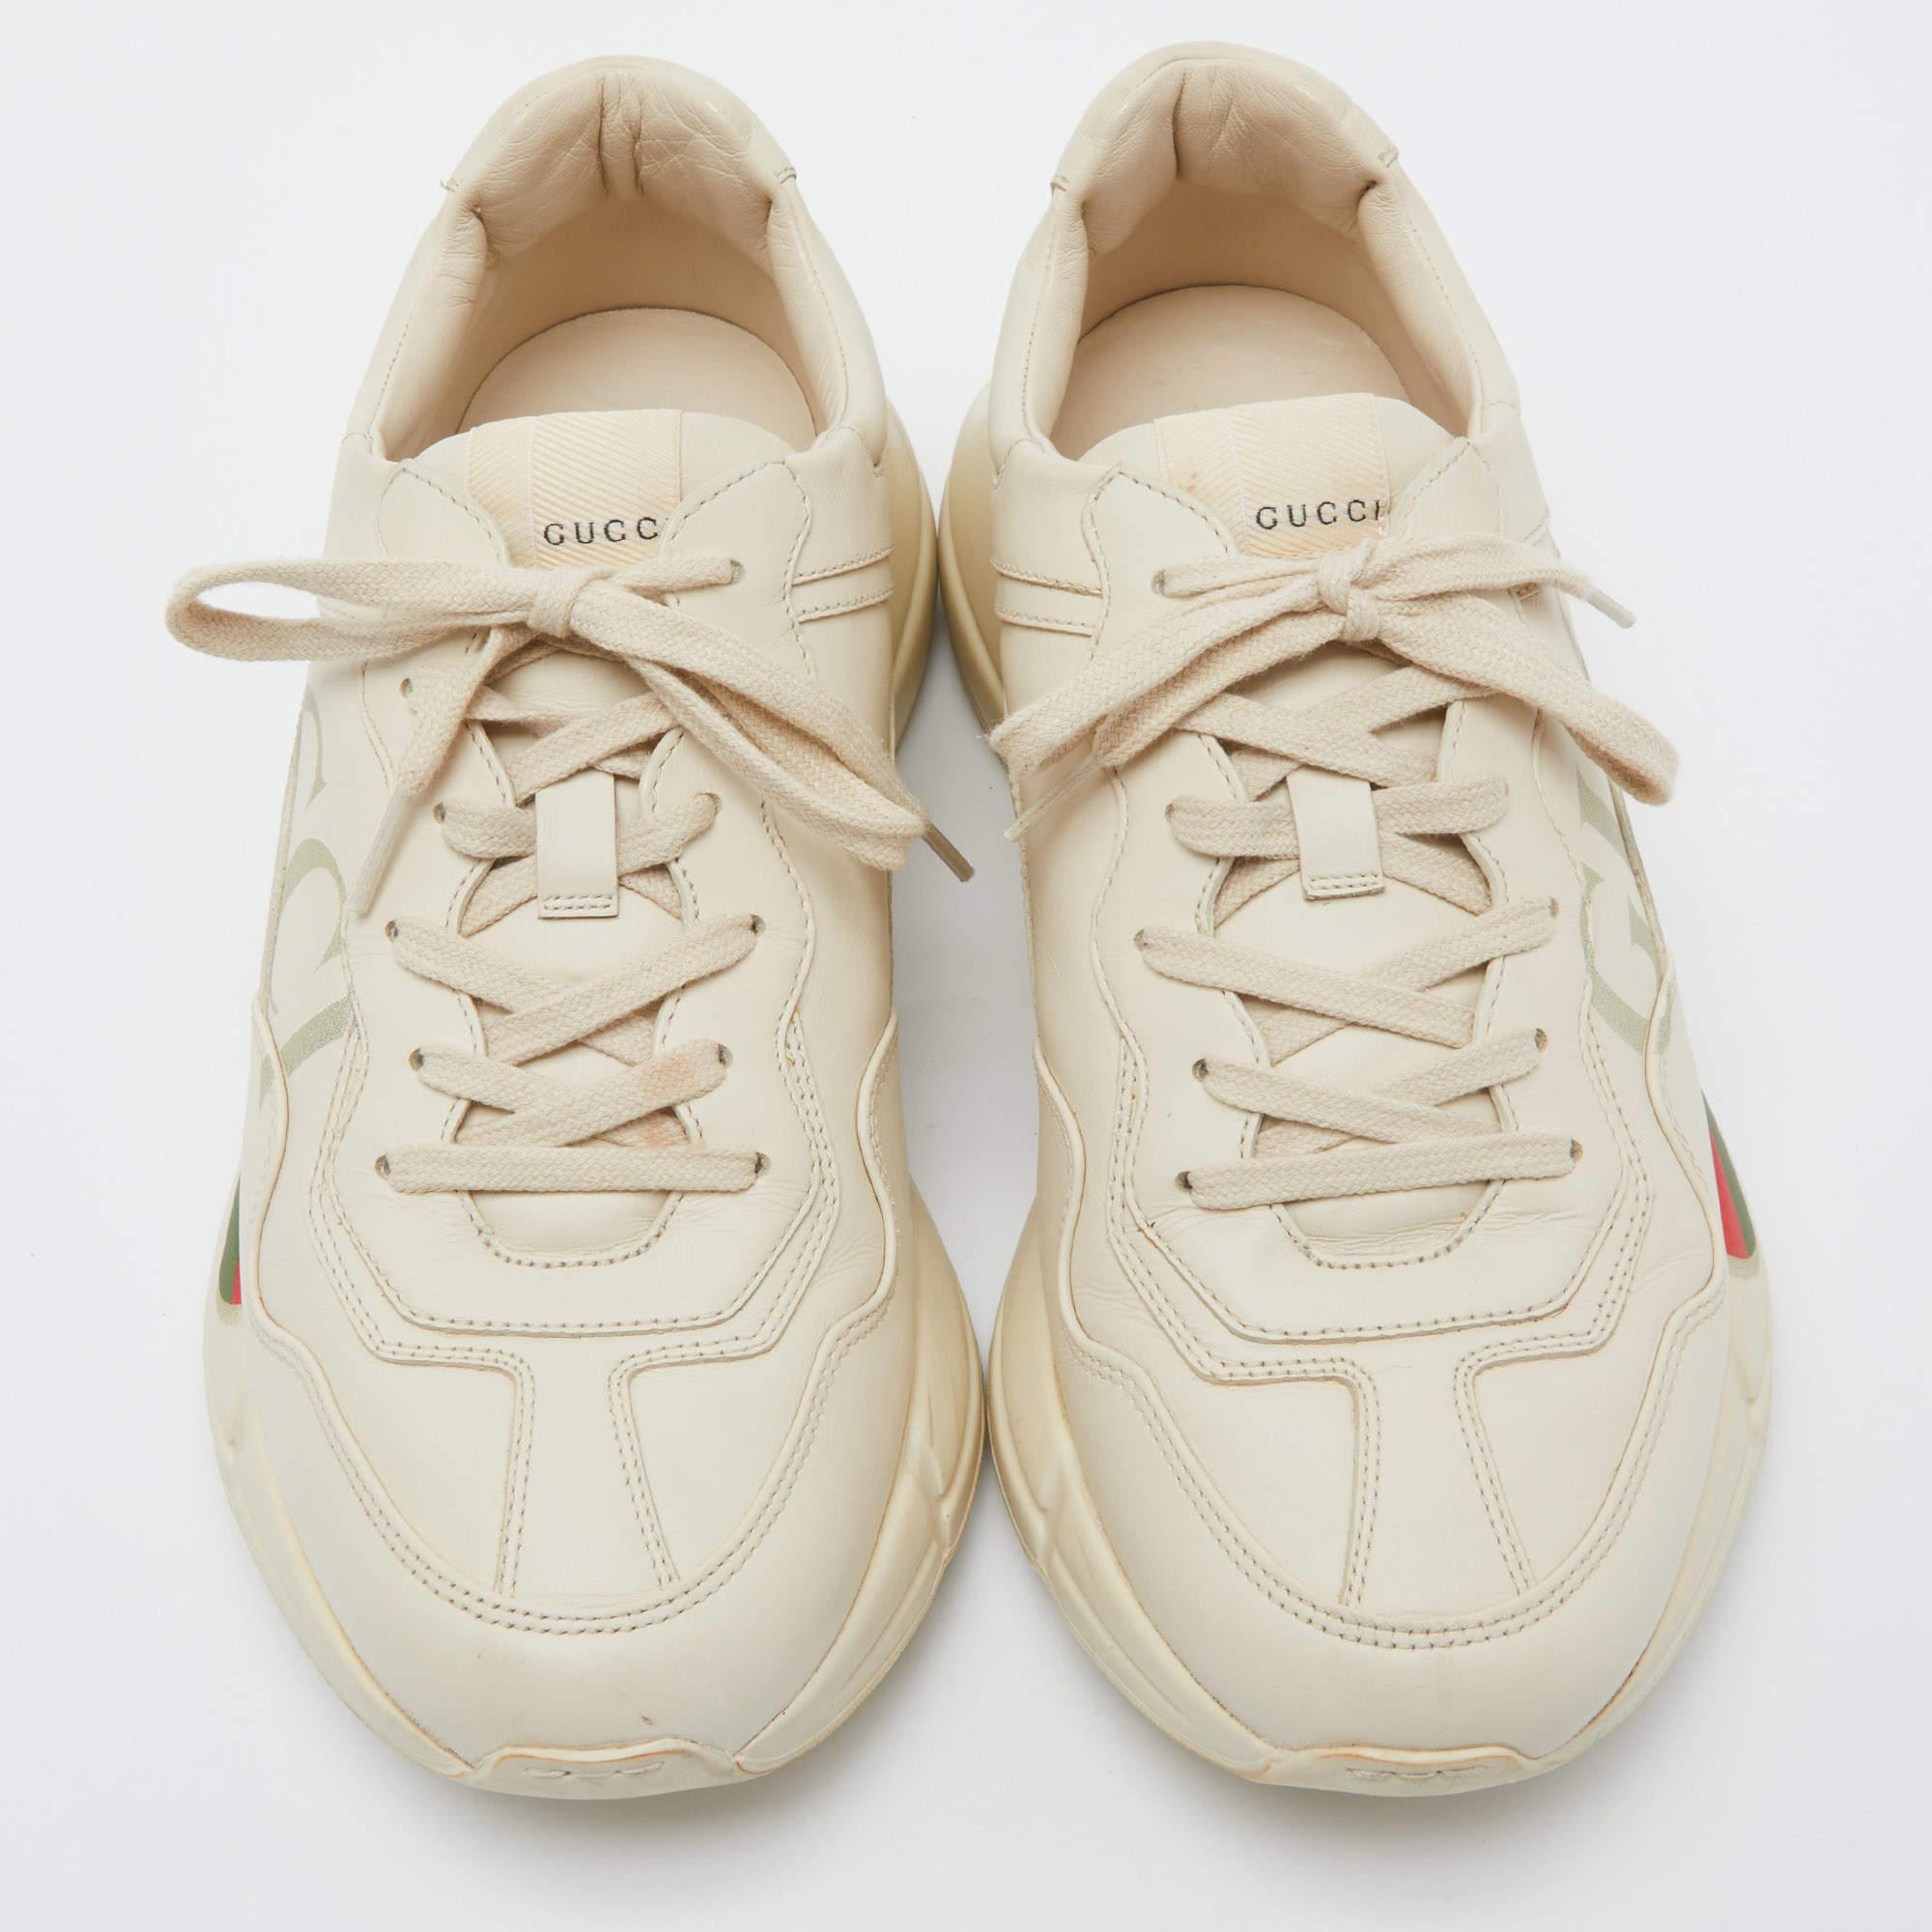 The time to feel trendy is now as Gucci brings you these superhit sneakers in beige. They are crafted from leather, detailed with lace-ups, signature elements, and are set on highly comfortable soles. You are sure to receive nods of approval when